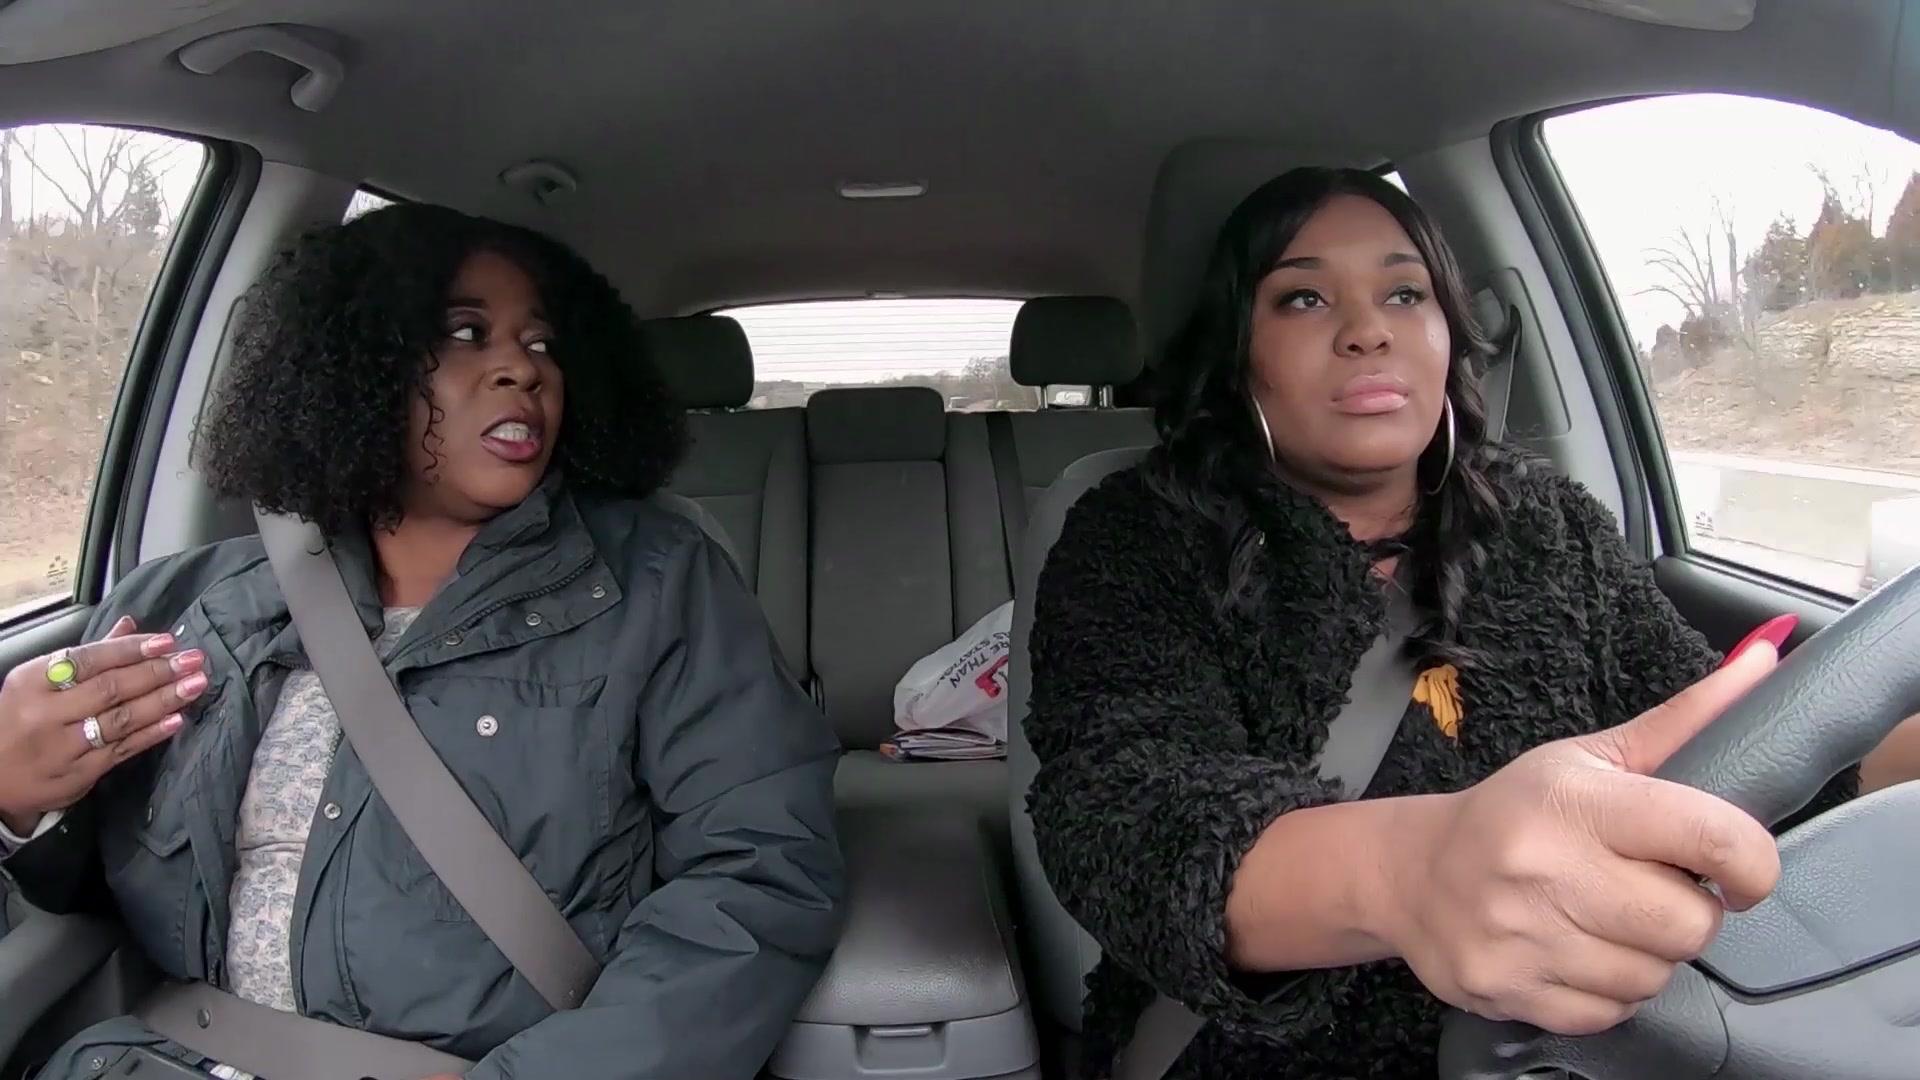 Watch Shavel & Quaylon's Mom Have a Tense First Meeting | Love After Lockup Video Extras